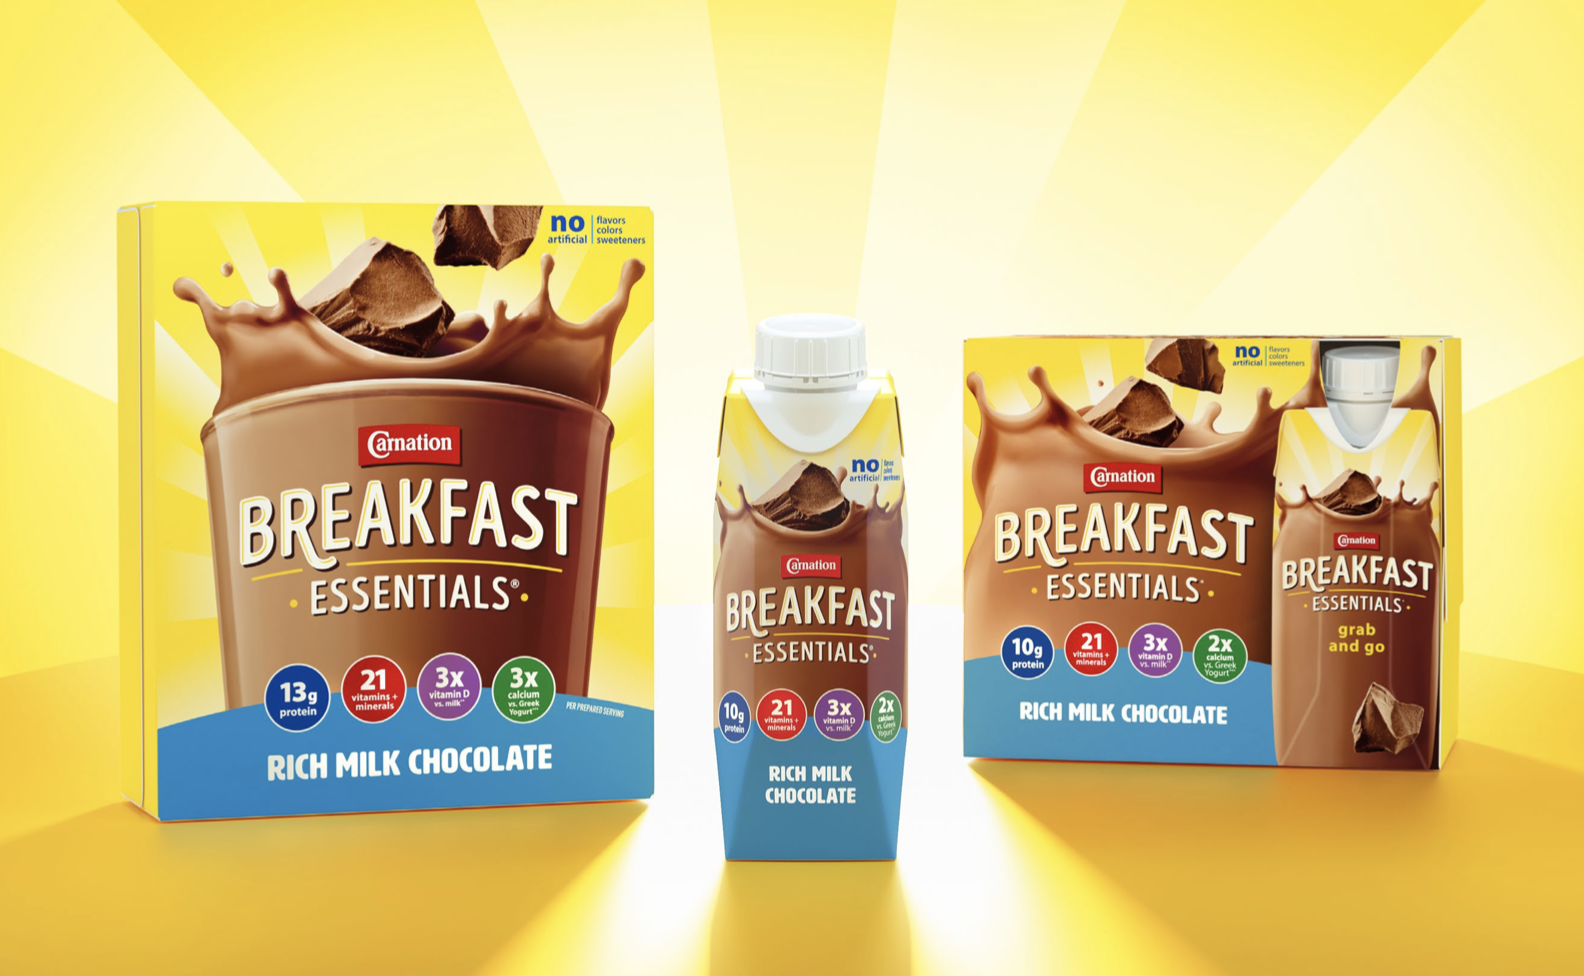 Start The Day Off Right With The Great Taste Of Carnation Breakfast Essentials® - New Look & Improved Recipe! on I Heart Publix